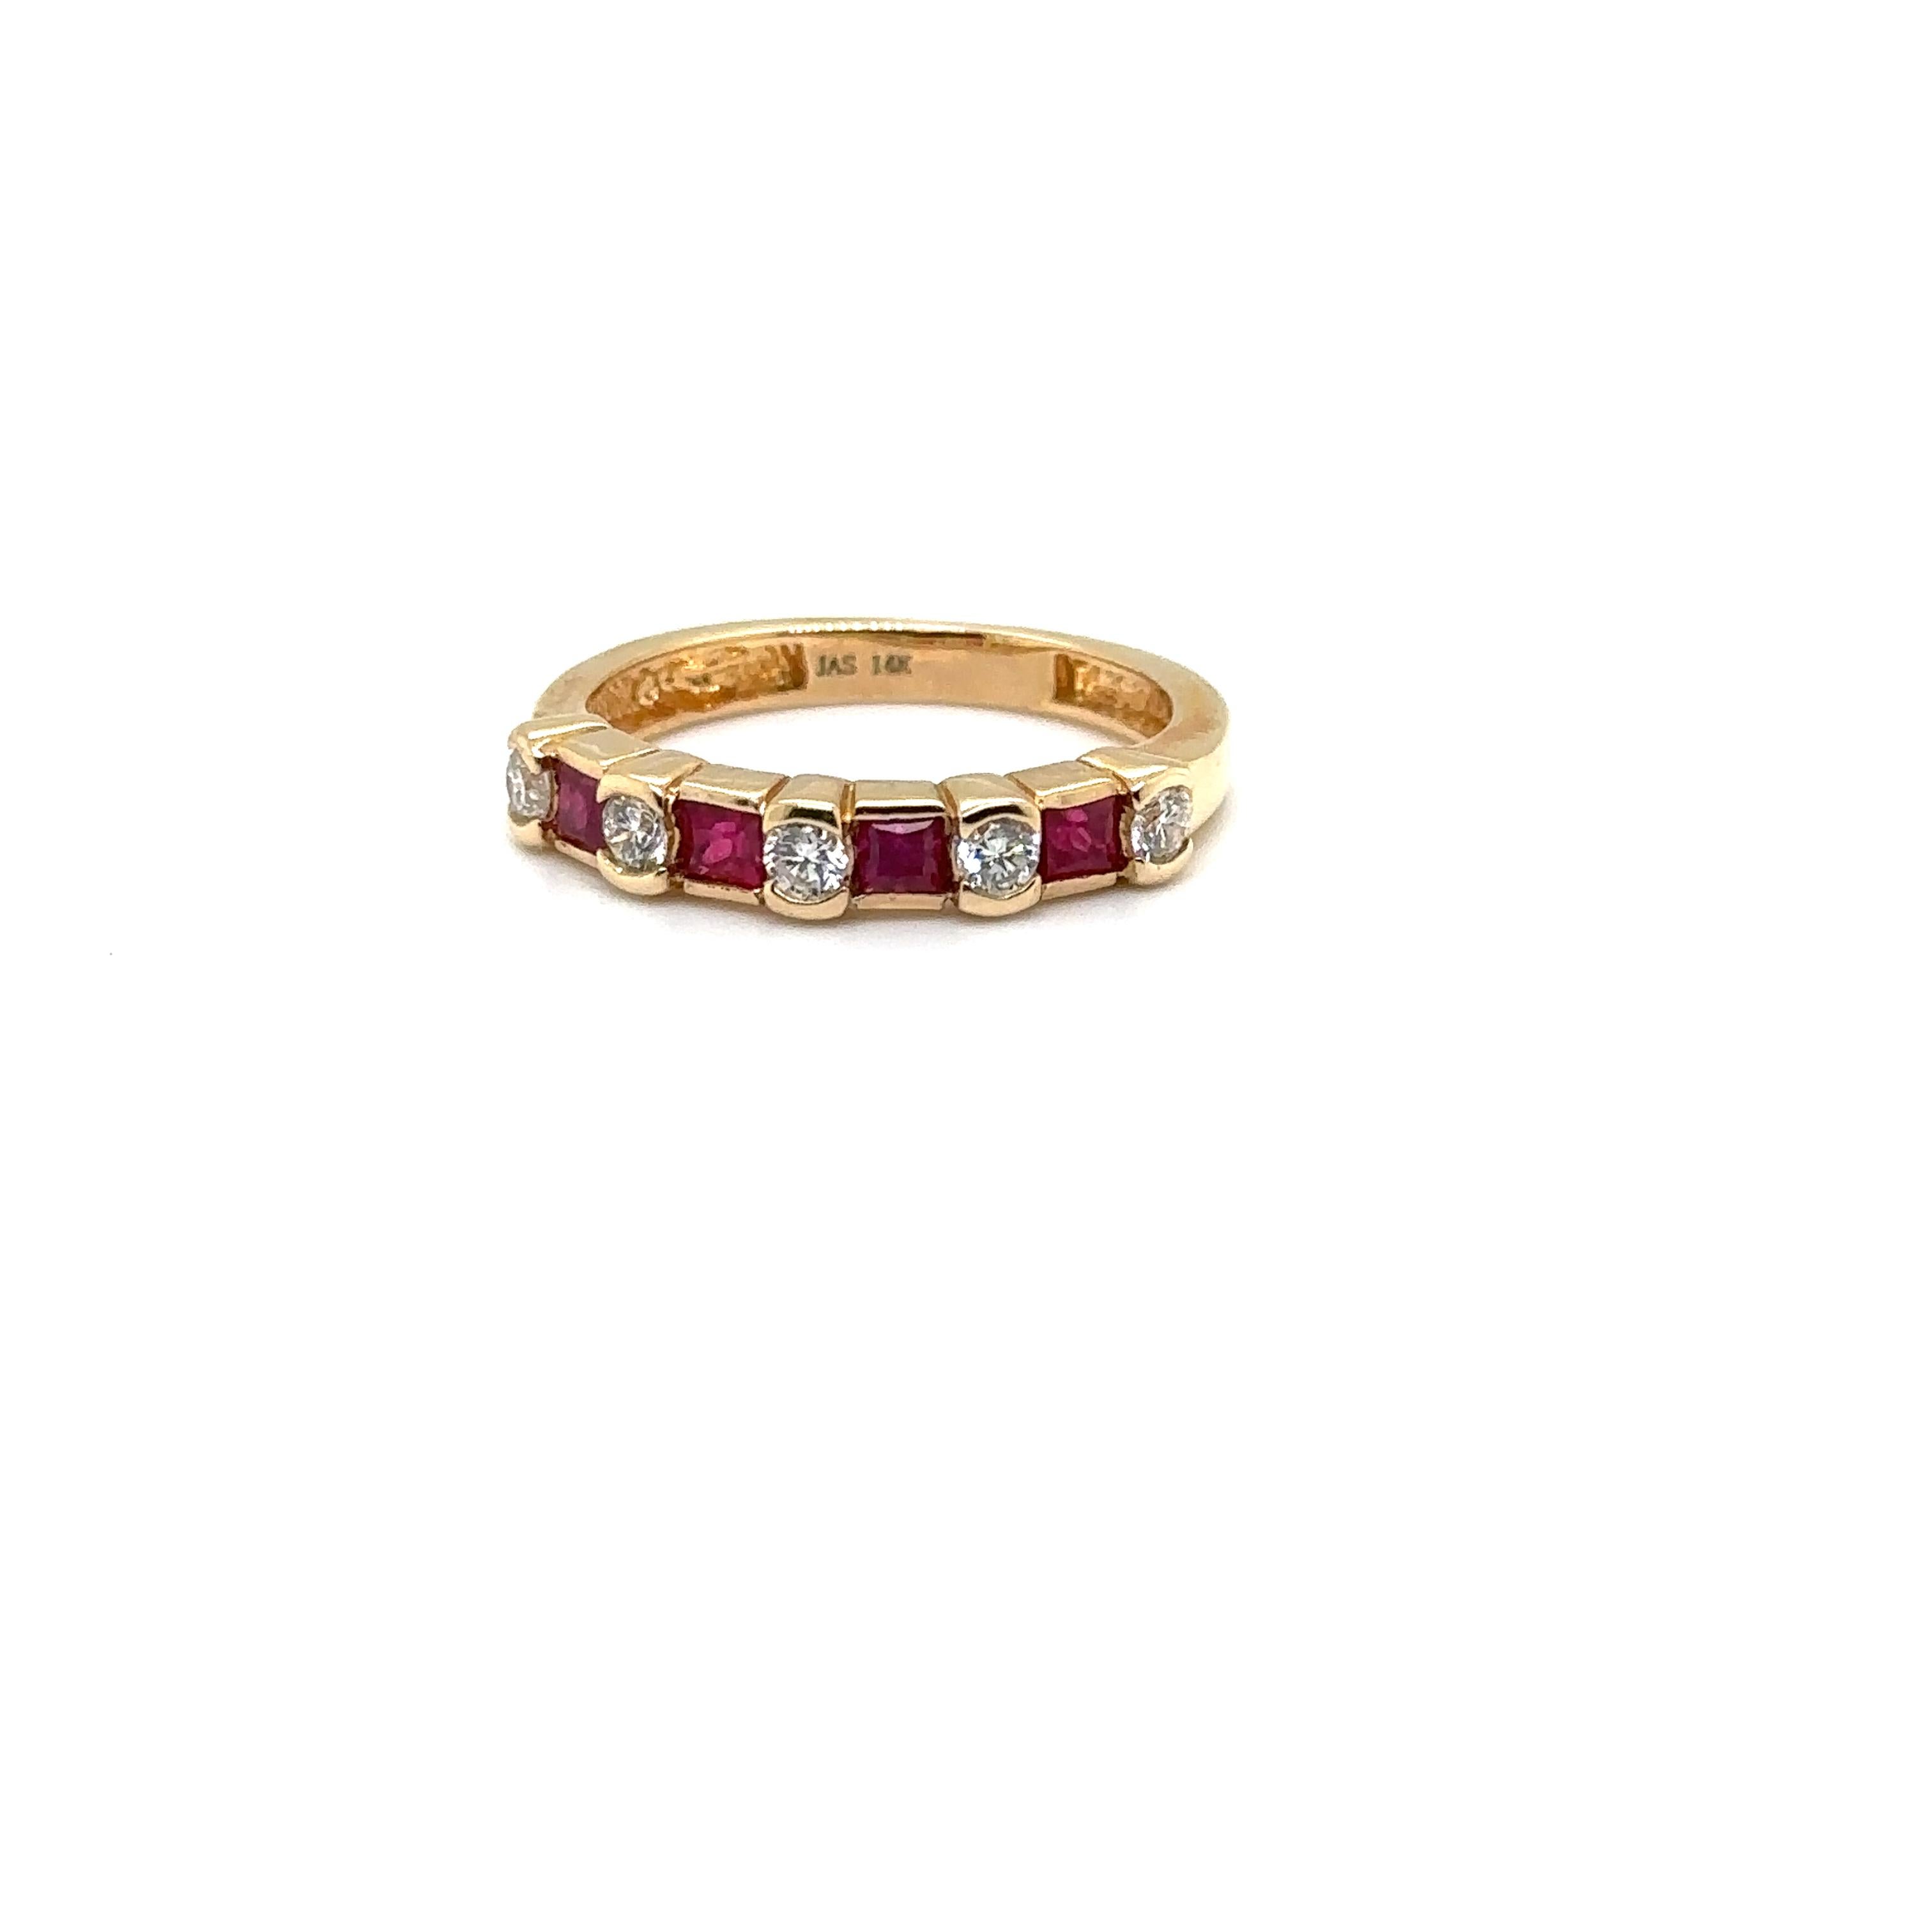 JAS-21-2221 - 14K YELLOW GOLD 0.35Ct GH-SI1 DIAS AND 0.40CT PRINCESS CUT RUBIES For Sale 2